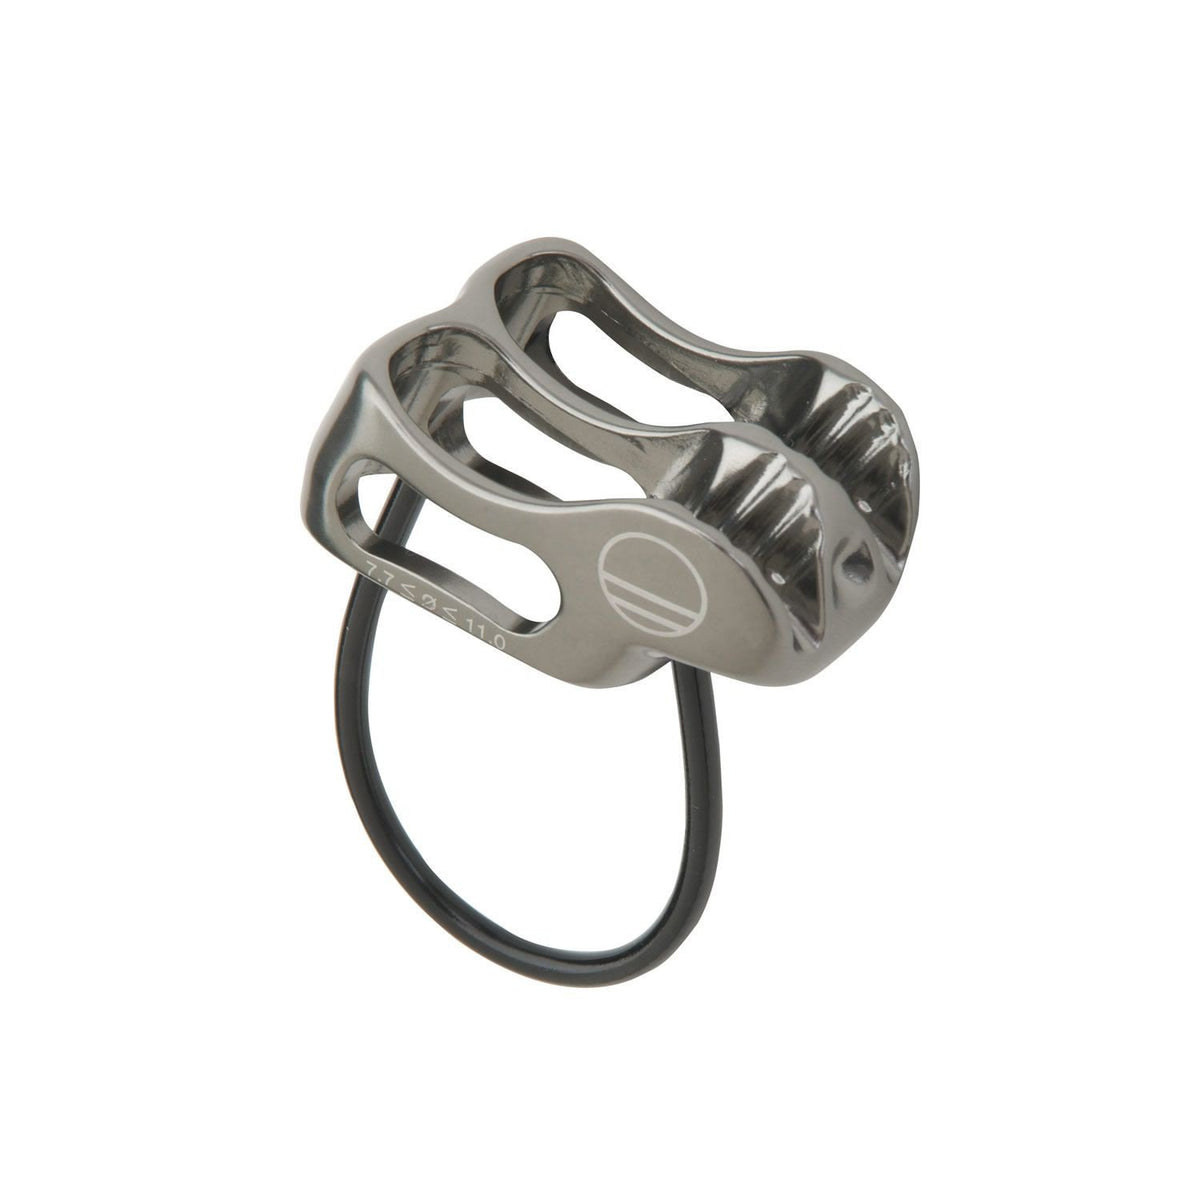 Wild Country Pro Lite belay device, front/side view showing in silver colour